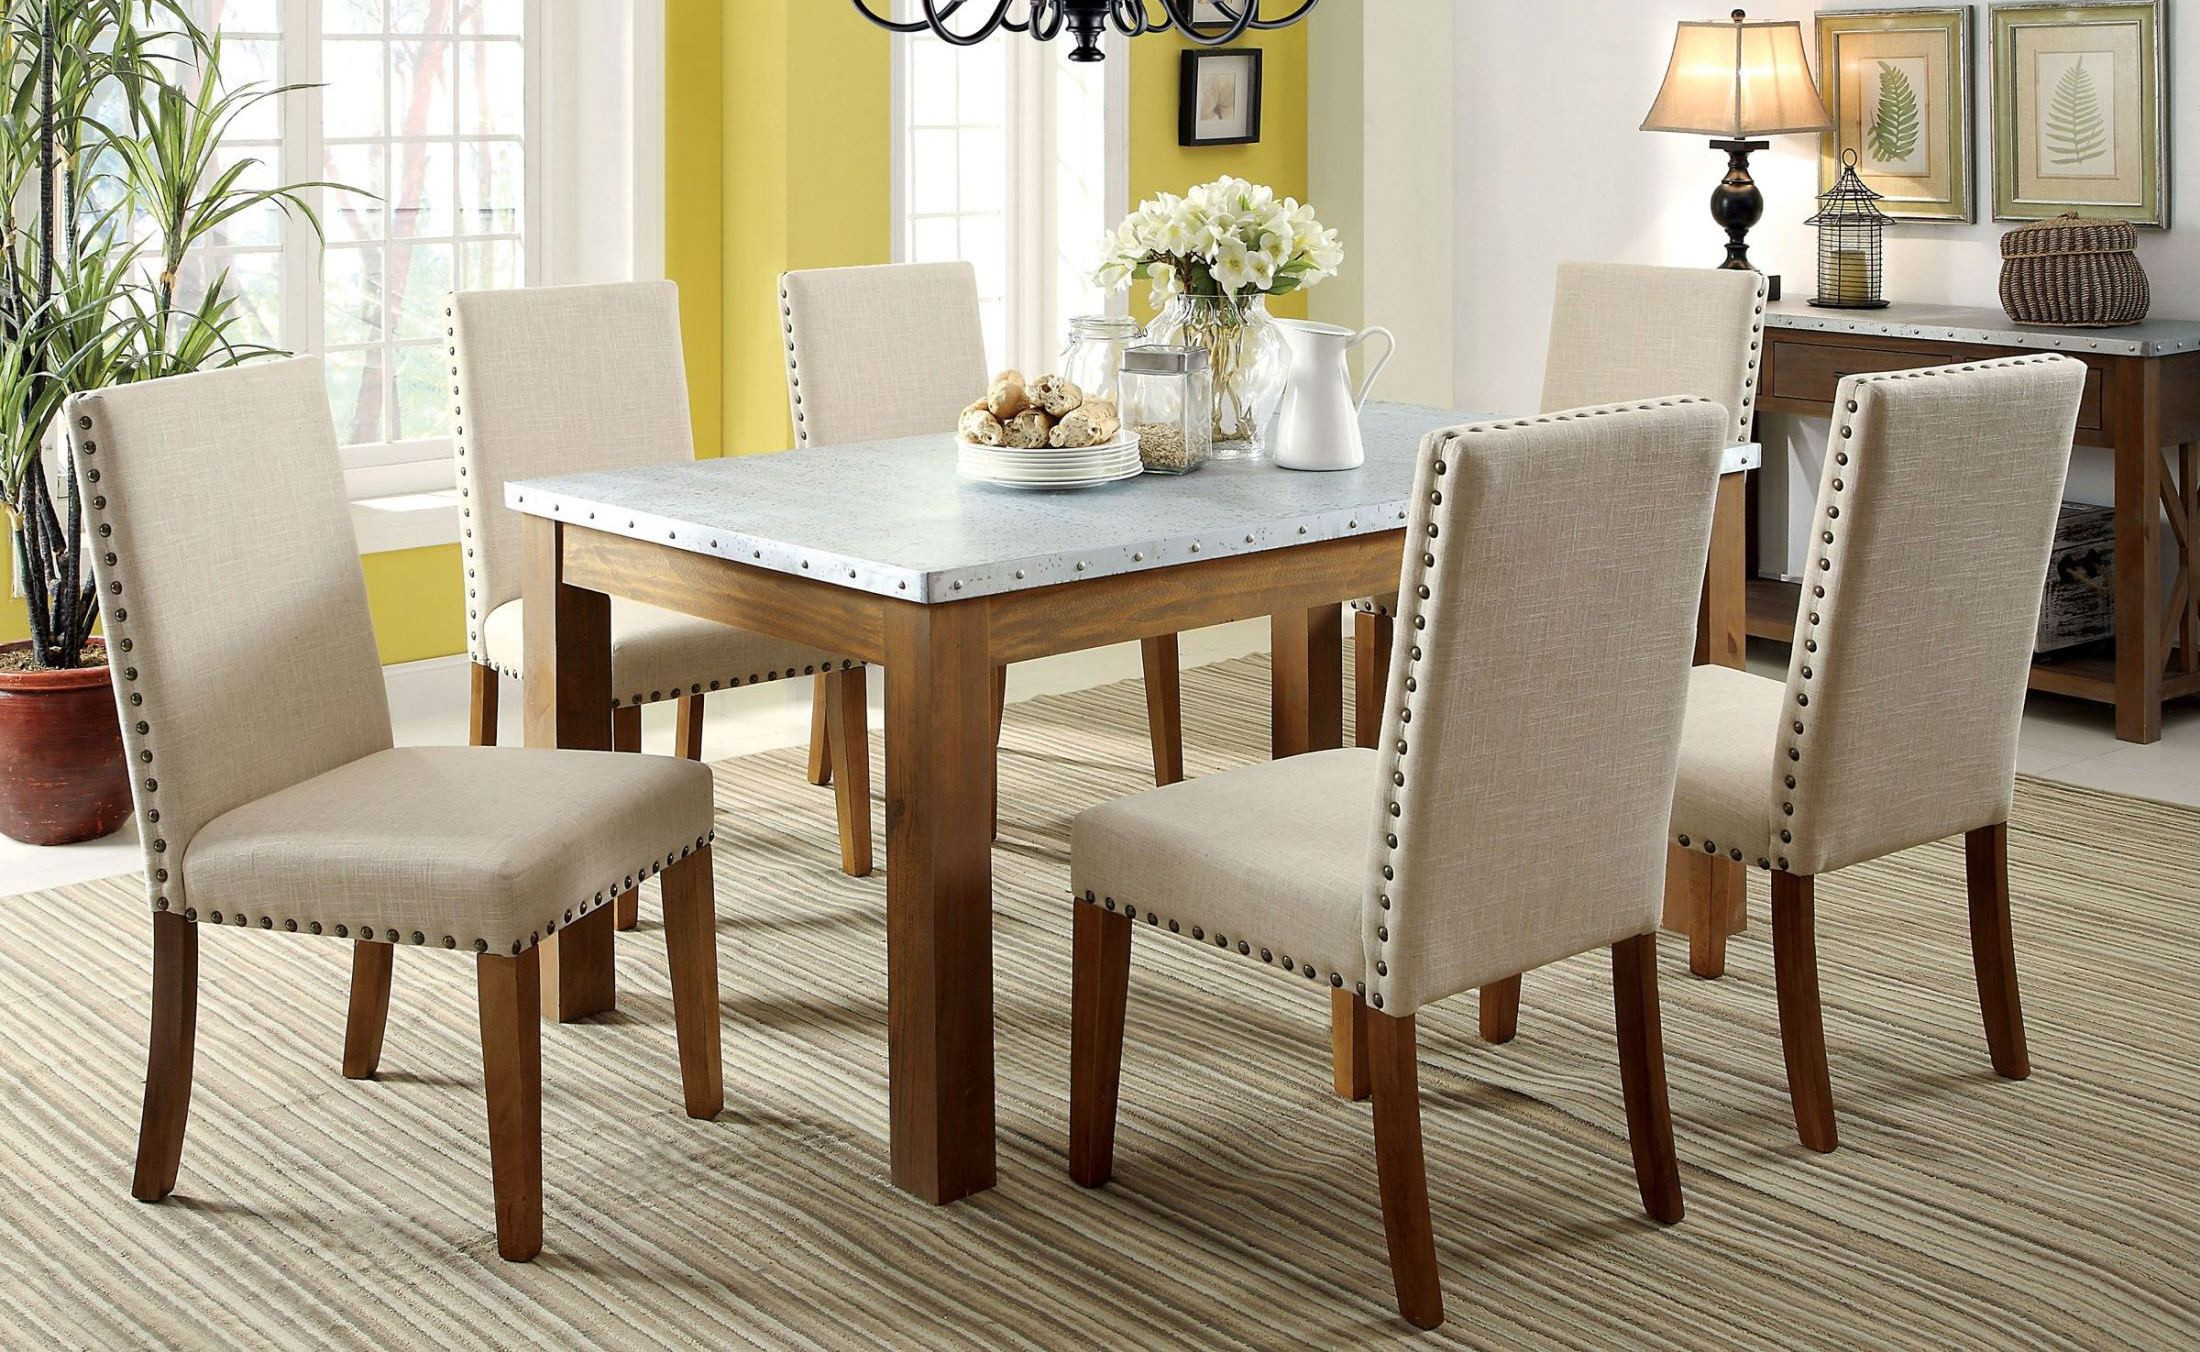 18 Famous Walsh Hardwood Flooring Reviews 2024 free download walsh hardwood flooring reviews of furniture of america walsh natural tone galvanized iron top in walsh natural tone galvanized iron top rectangular dining room set